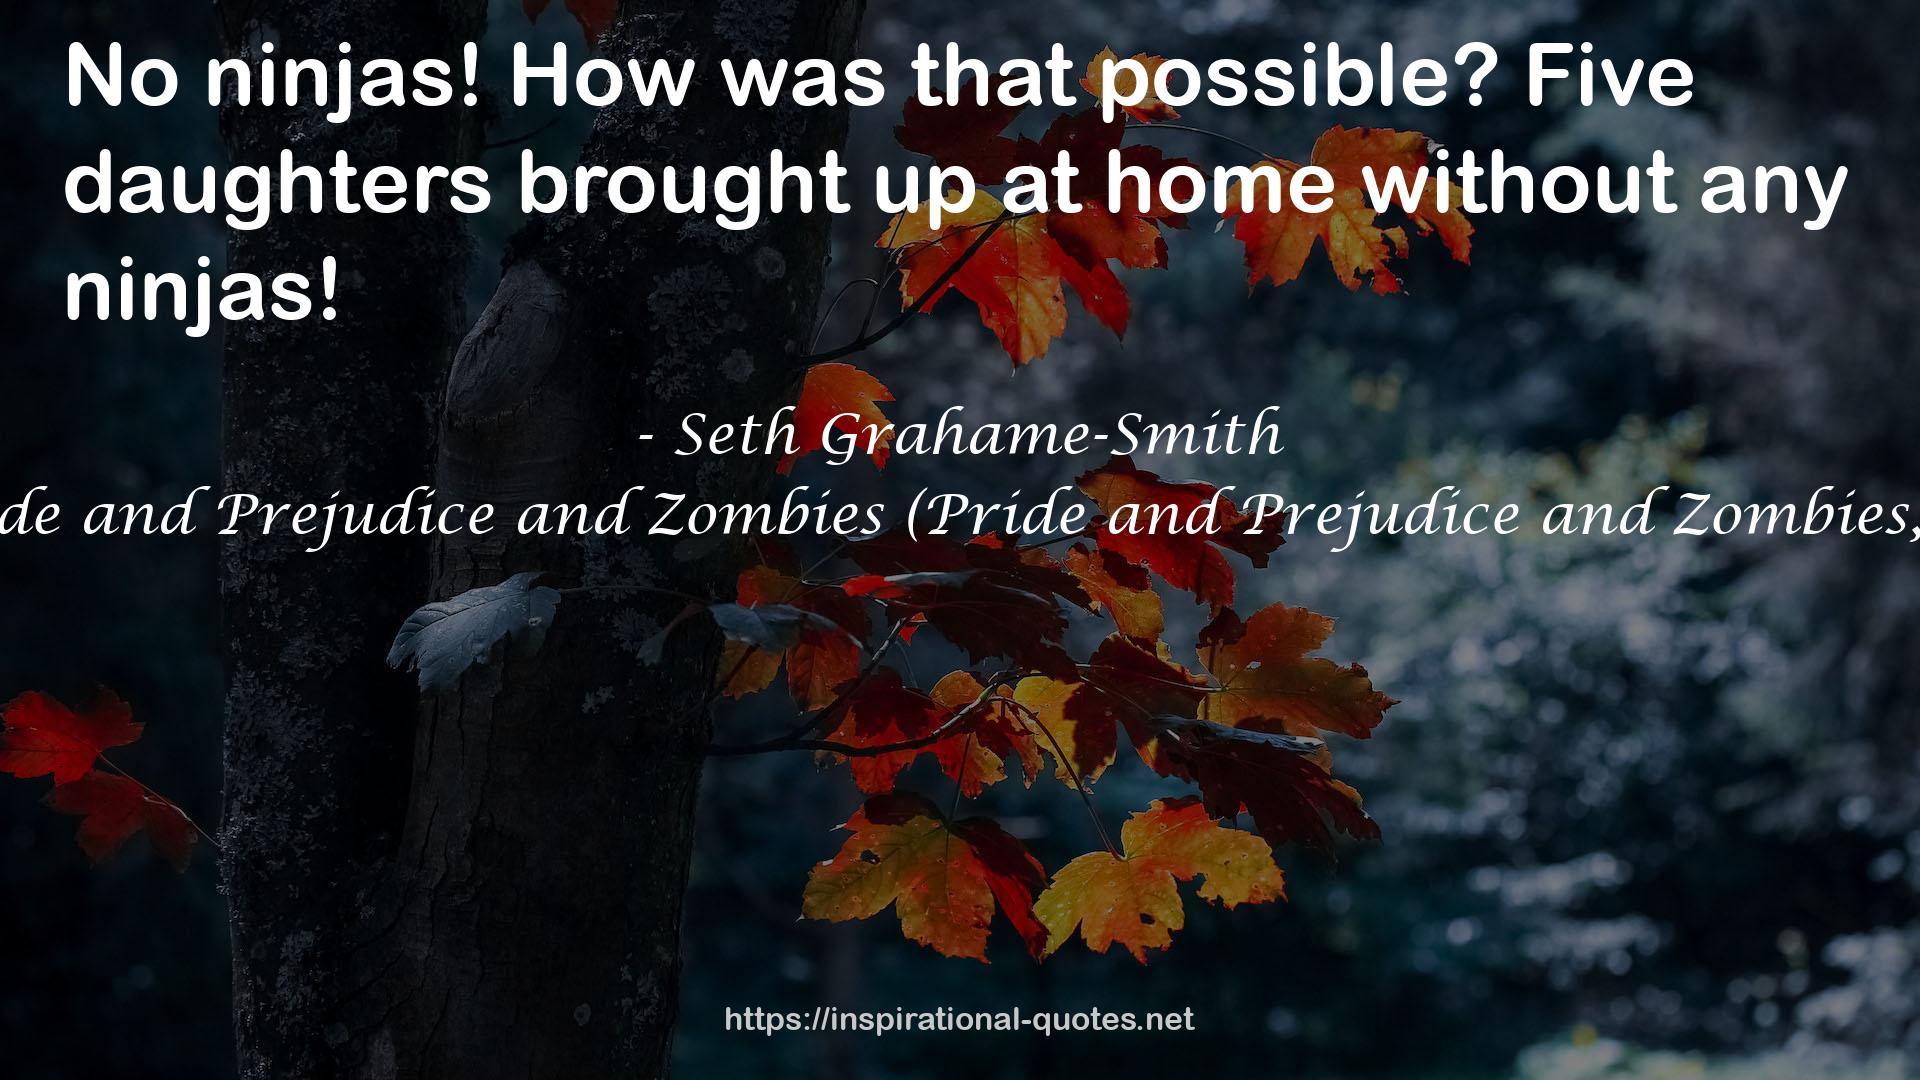 Pride and Prejudice and Zombies (Pride and Prejudice and Zombies, #1) QUOTES